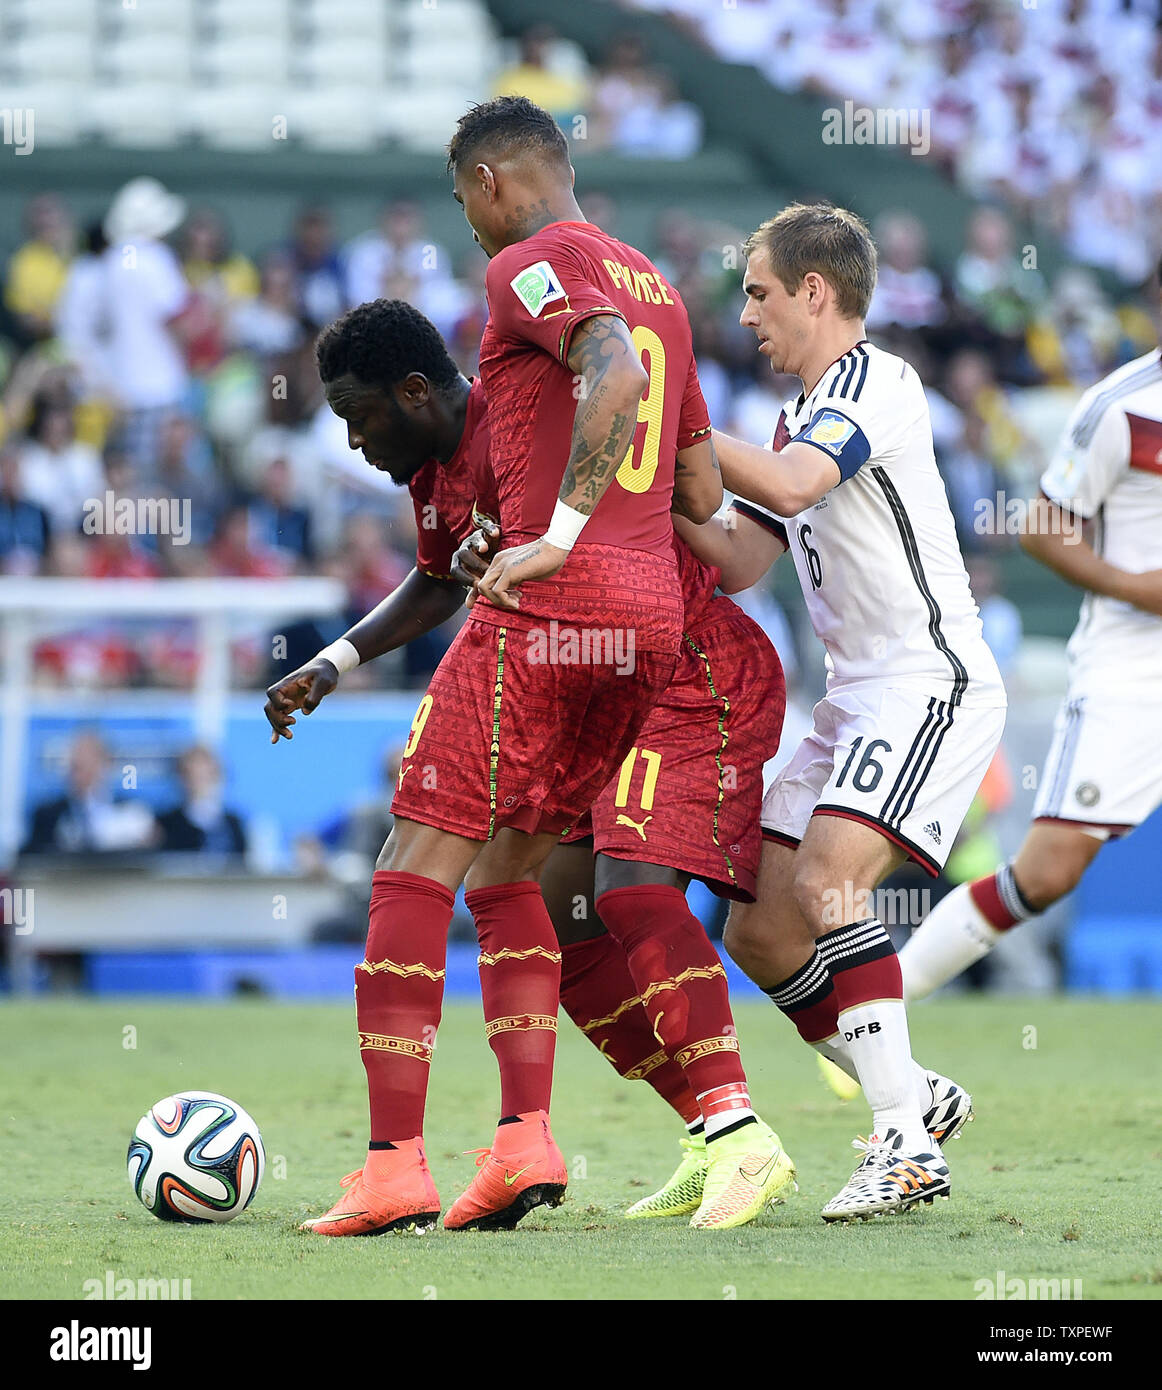 Philipp Lahm of Germany competes with Sulley Muntari (L) of Ghana during the 2014 FIFA World Cup Group G match at the Estadio Castelao in Fortaleza, Brazil on June 21, 2014. UPI/Chris Brunskill Stock Photo